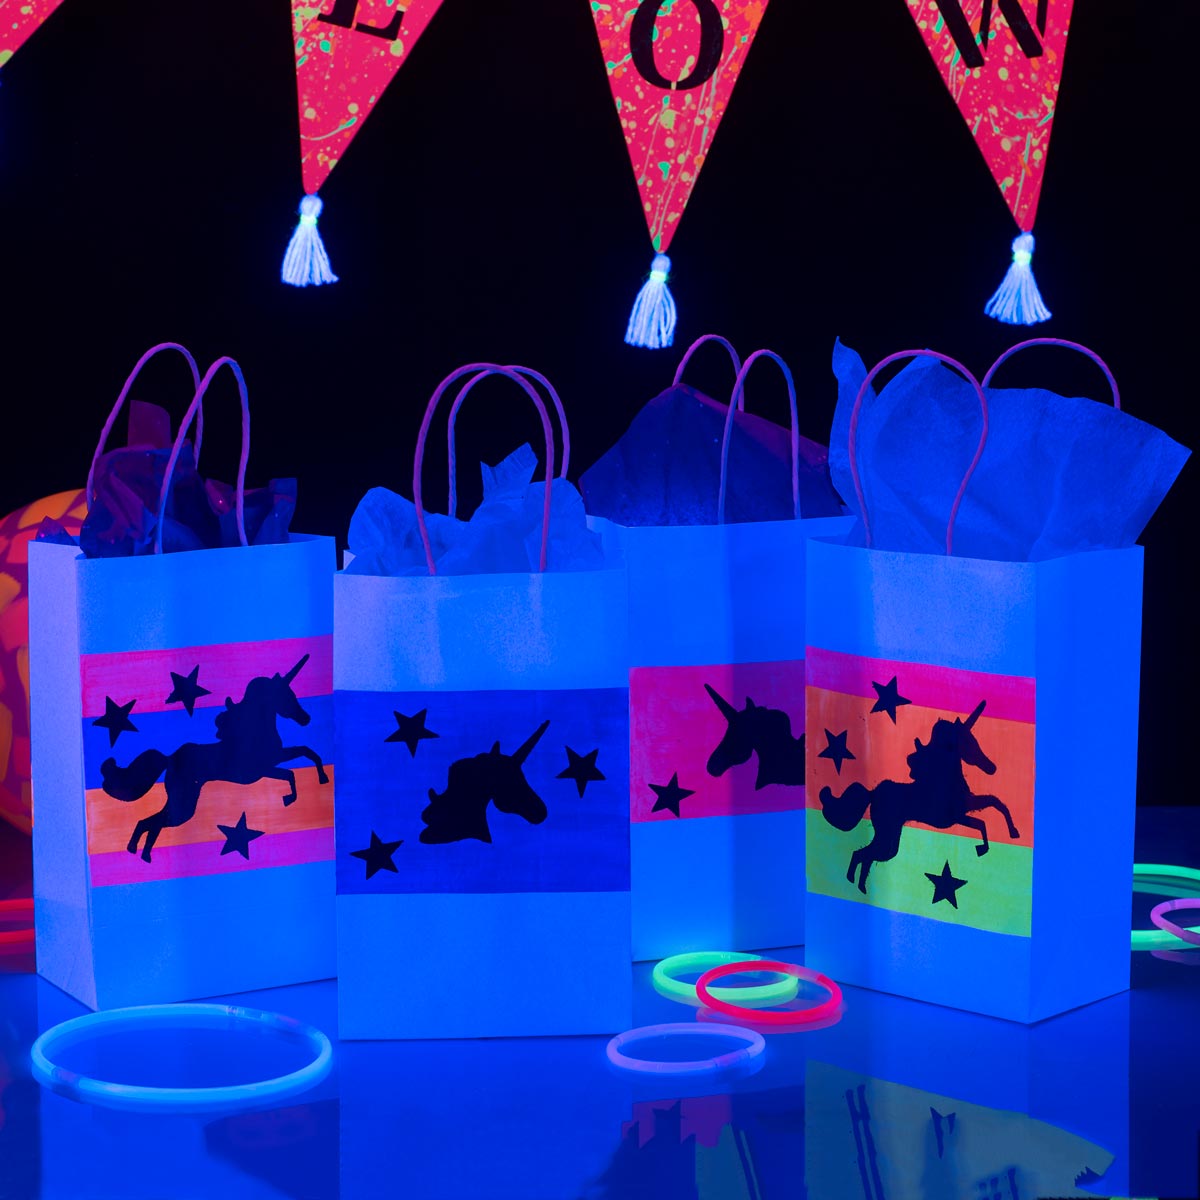 24 Pcs Glow in The Dark Gift Bags Bulk 6 Different Design Party Favor Bags  Black Gift Paper Bags wit…See more 24 Pcs Glow in The Dark Gift Bags Bulk 6